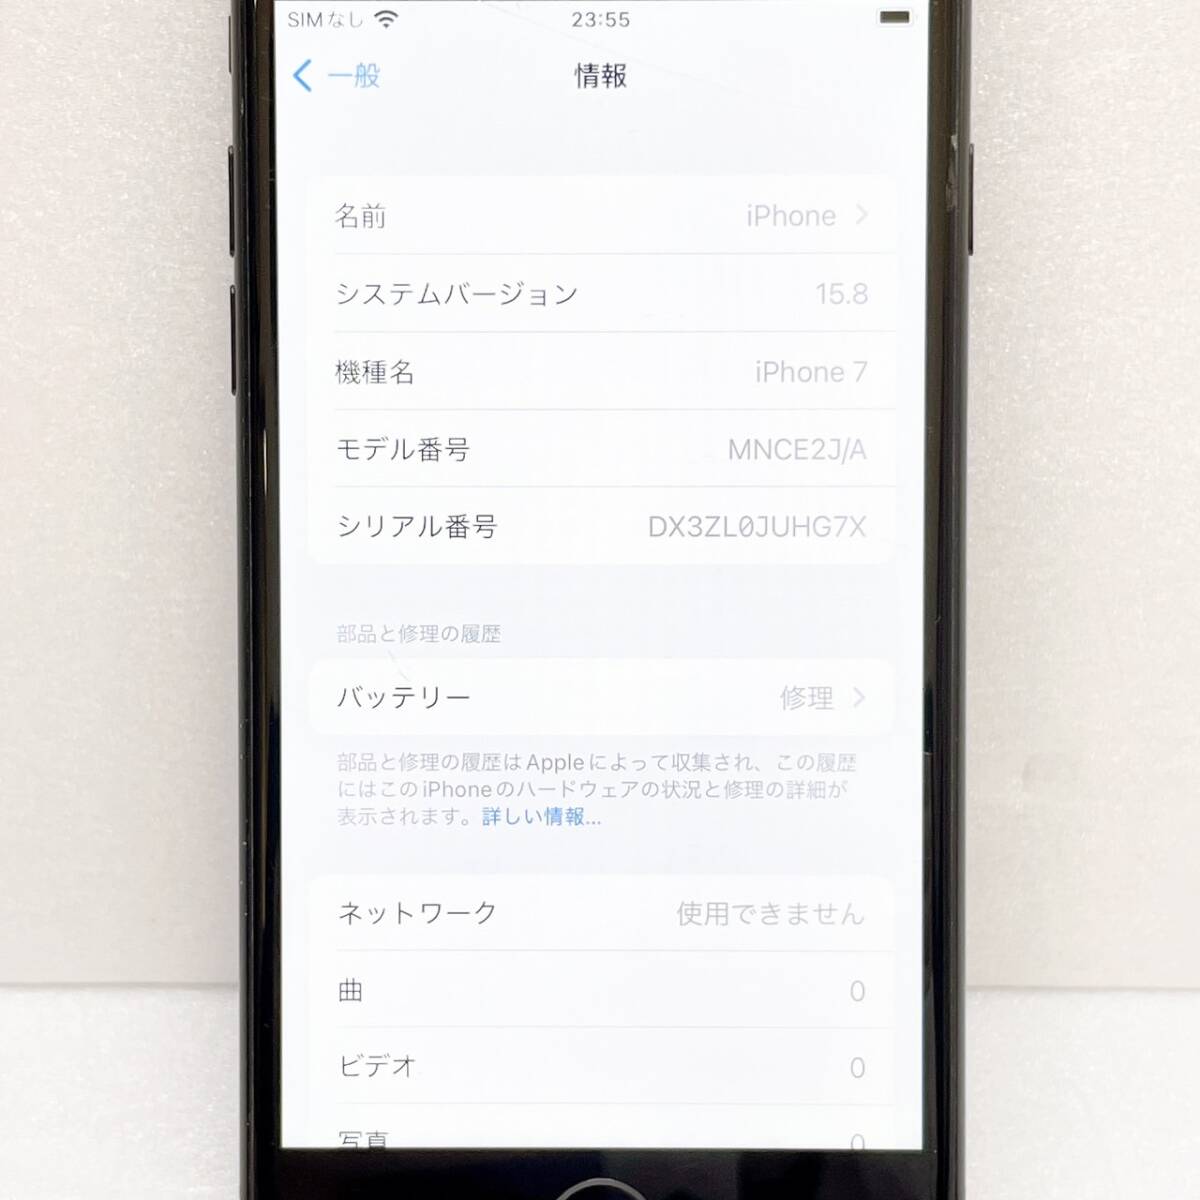 【DHS1990AT】iPhone7 32GB MNCE2J/A A1779 ブラック 判定○ SIMロックあり 表示 IMEI:355851083564556 画面割れありの画像5